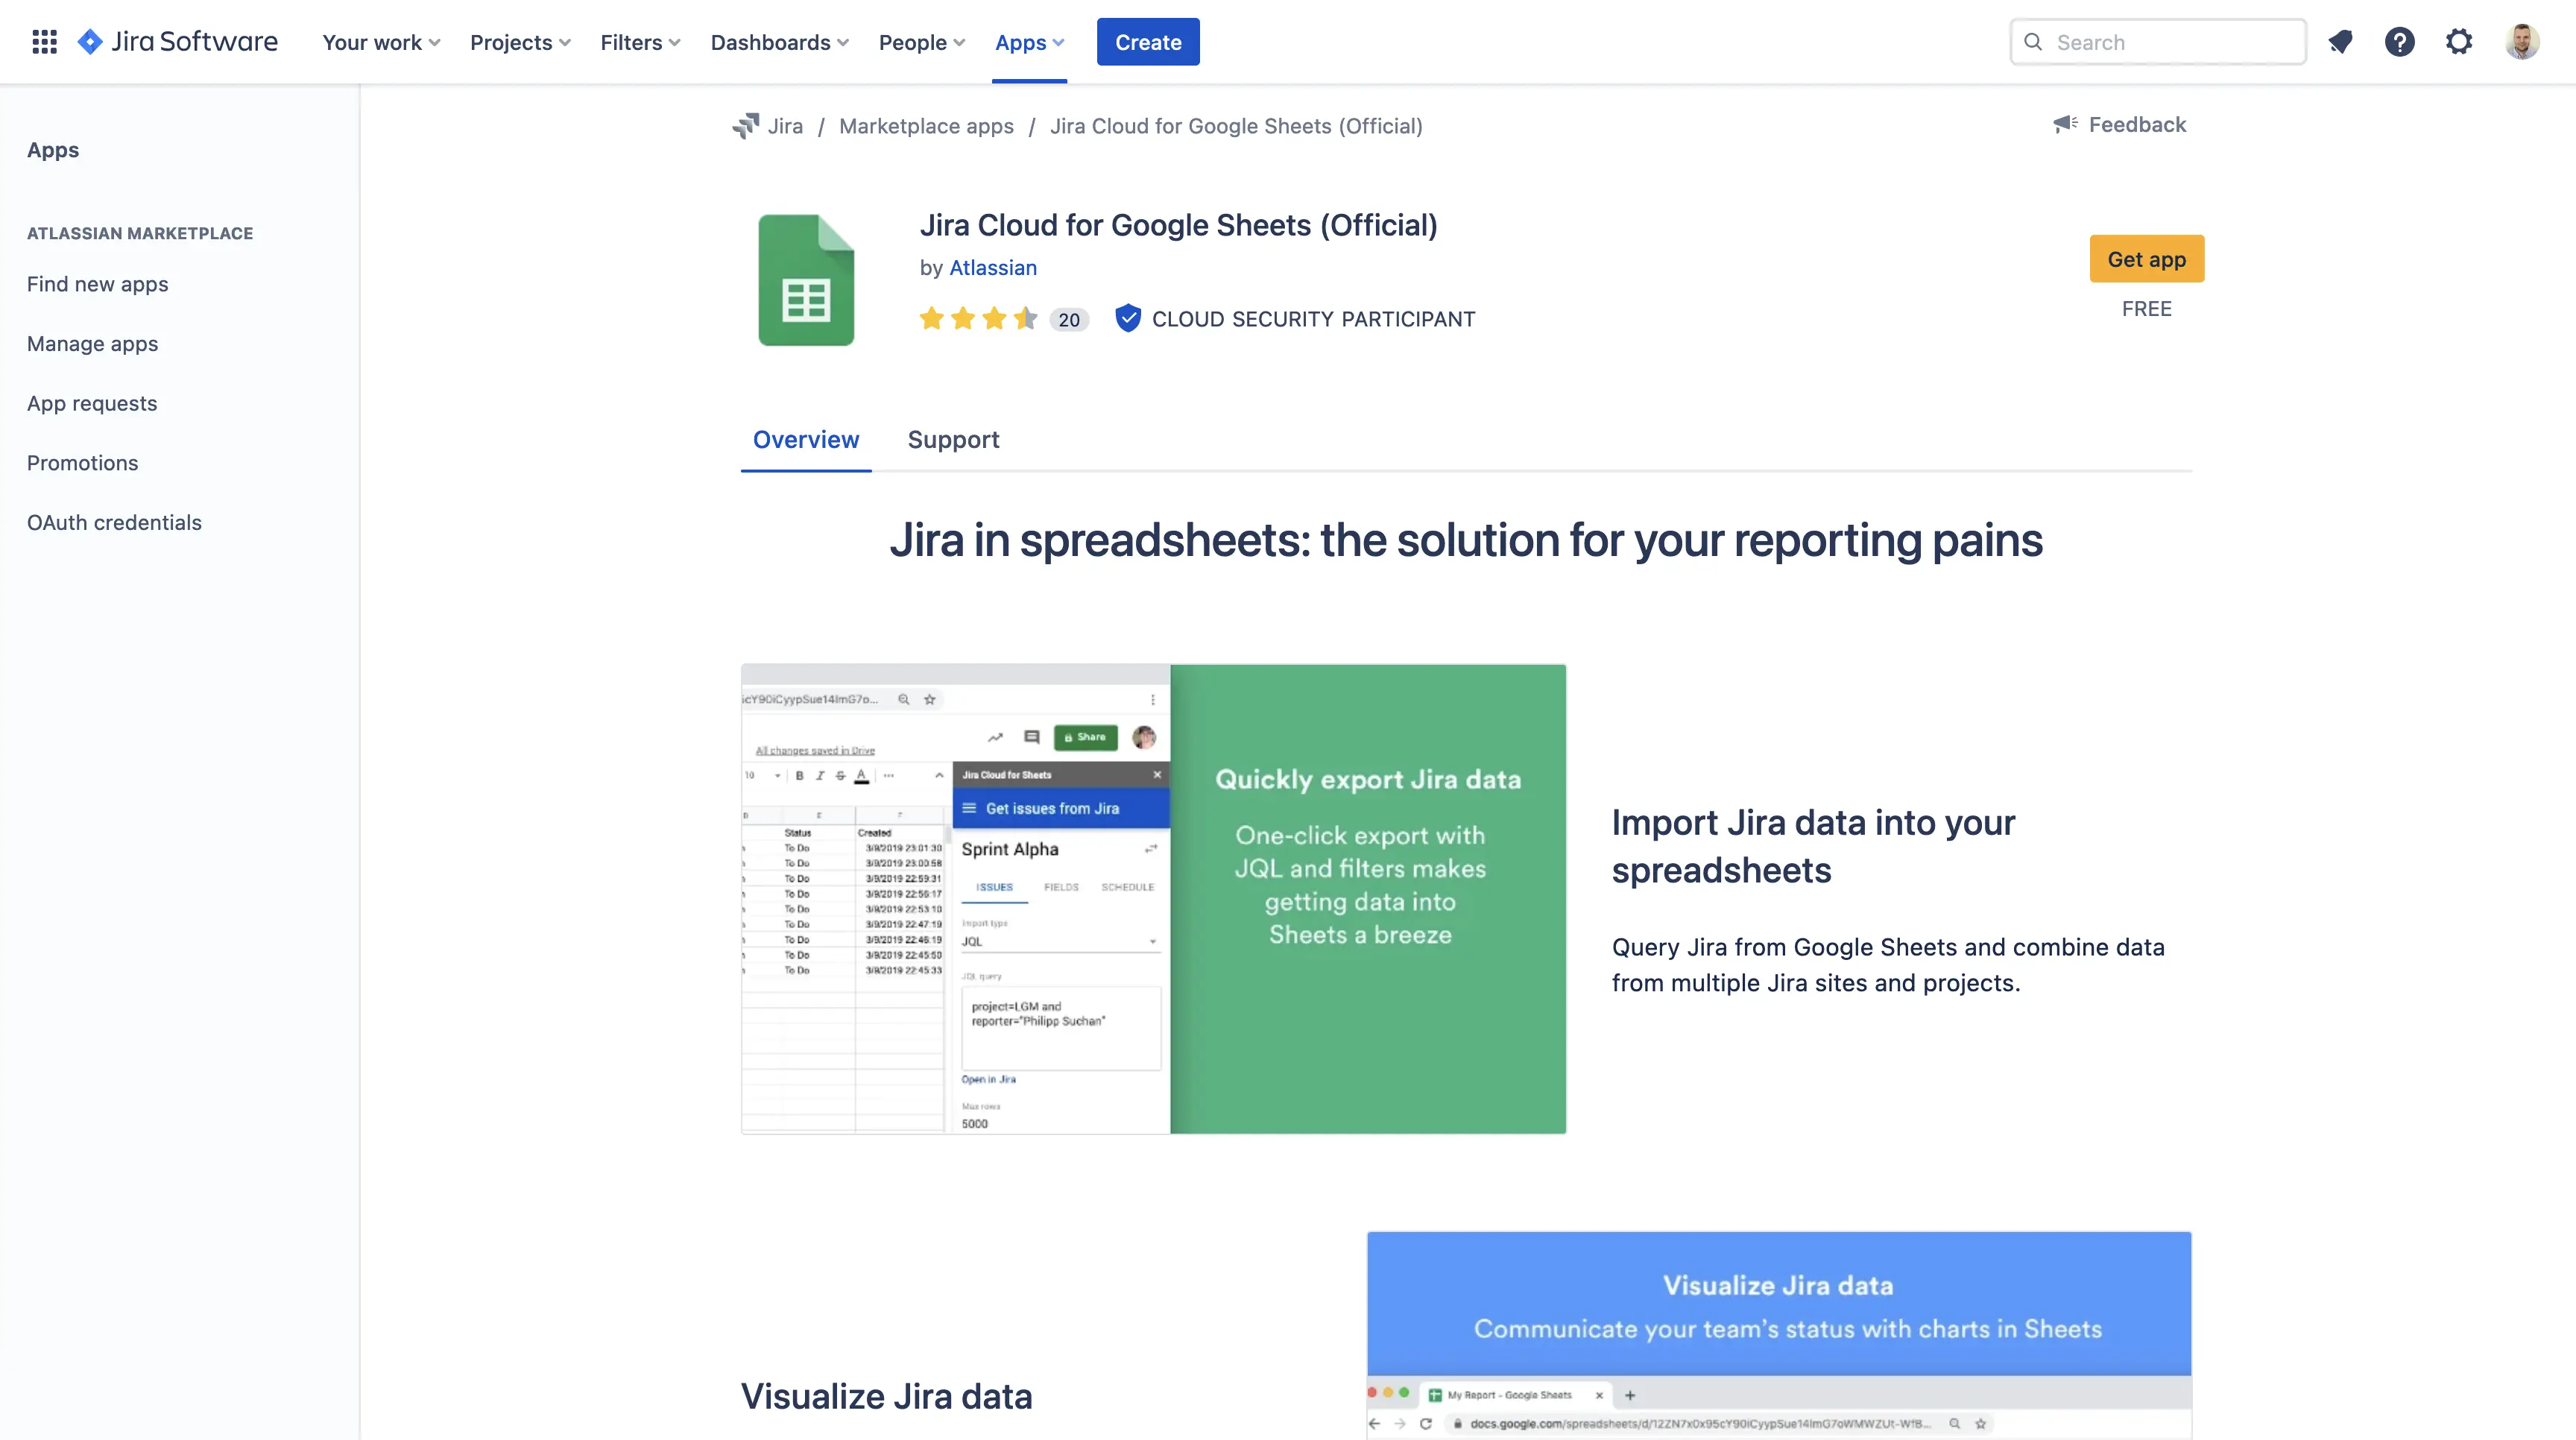 Select the Jira Cloud for Google Sheets from the Atlassian marketplace